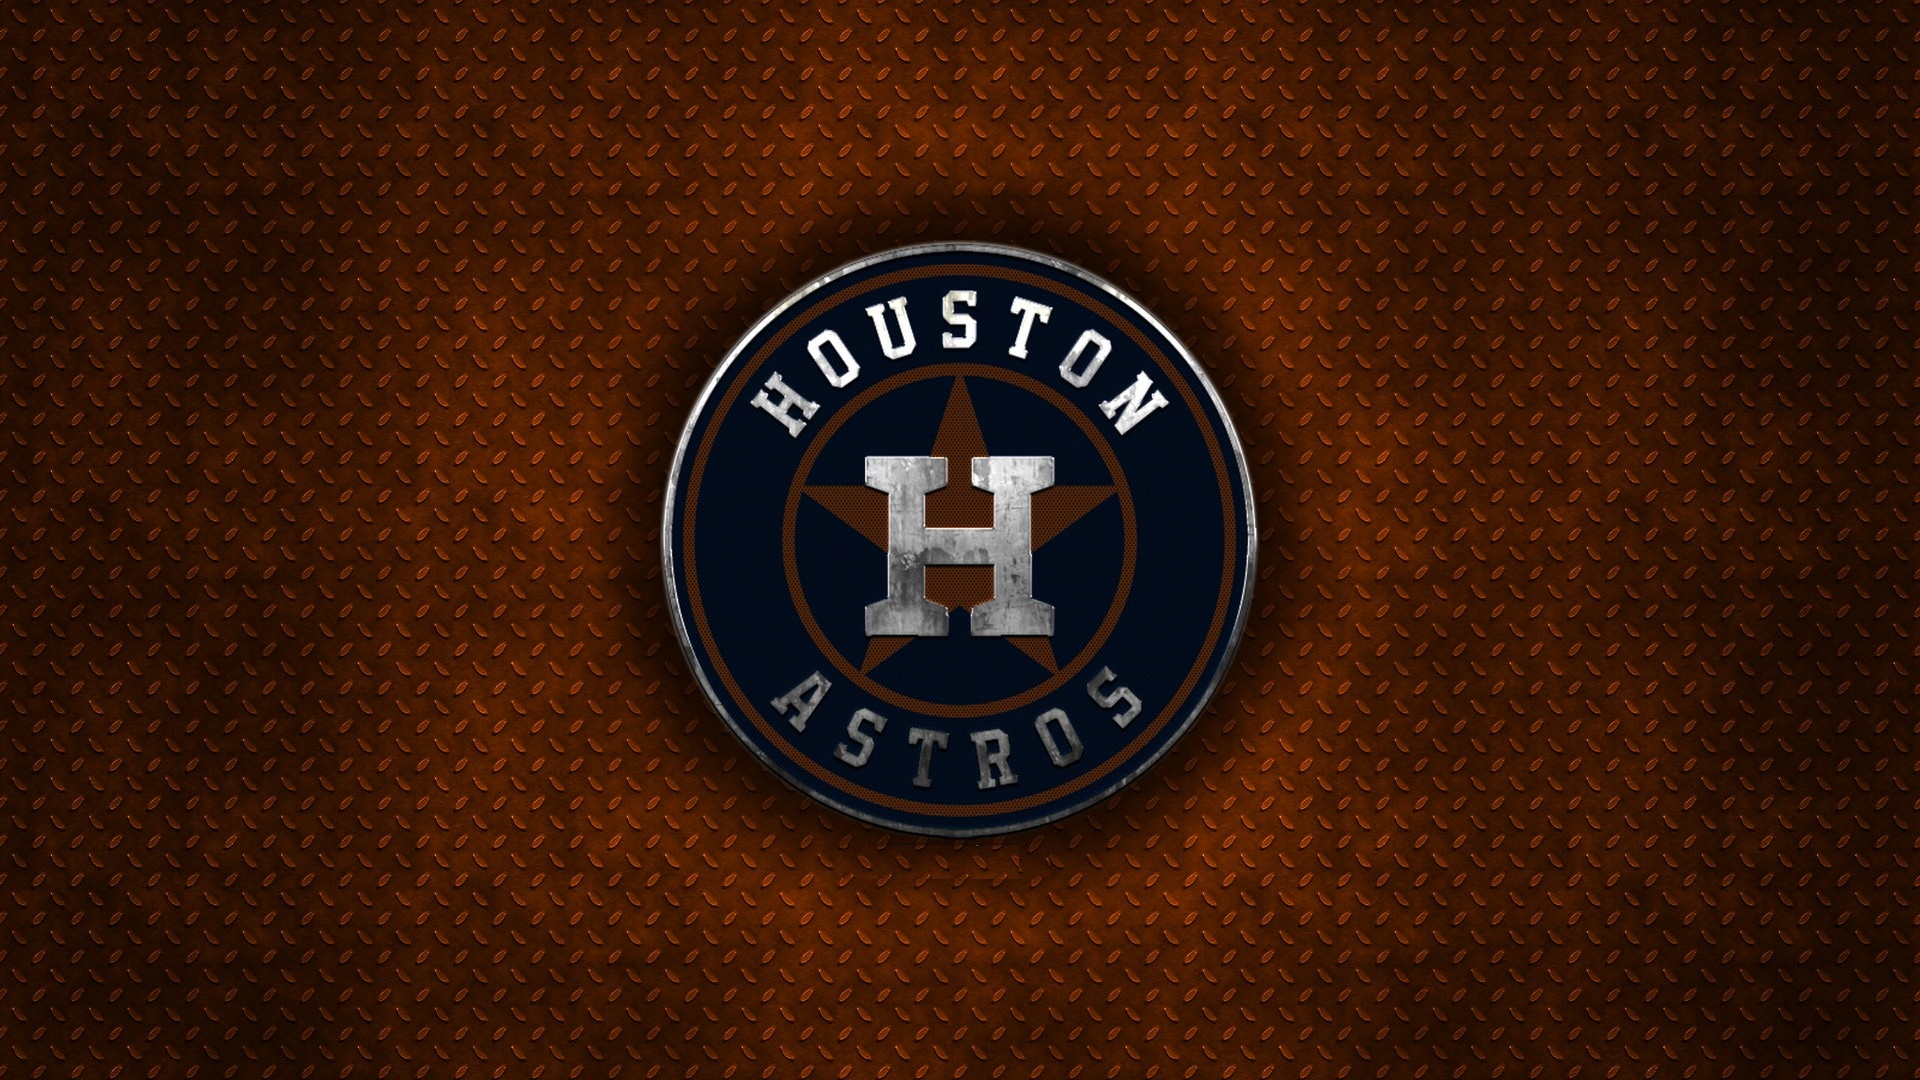 Houston Astros For Desktop Wallpaper with high-resolution 1920x1080 pixel. You can use this wallpaper for Mac Desktop Wallpaper, Laptop Screensavers, Android Wallpapers, Tablet or iPhone Home Screen and another mobile phone device